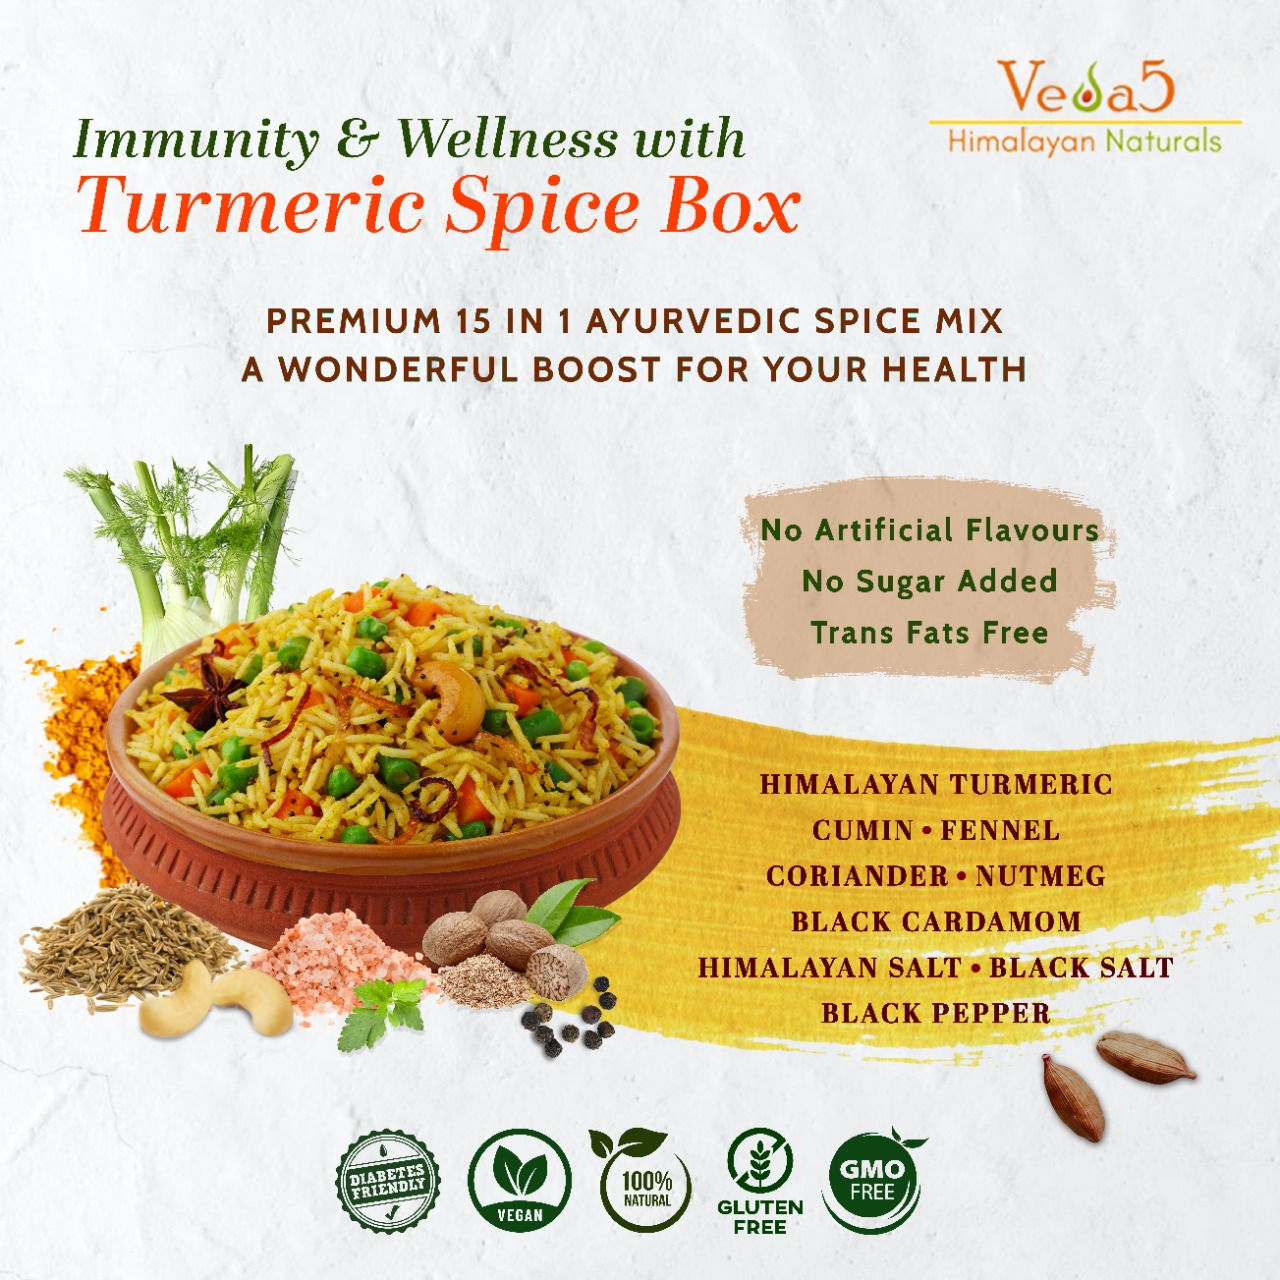 Turmeric Spice Box 15 in 1 Ingredients Veda5 Himalayan Naturals